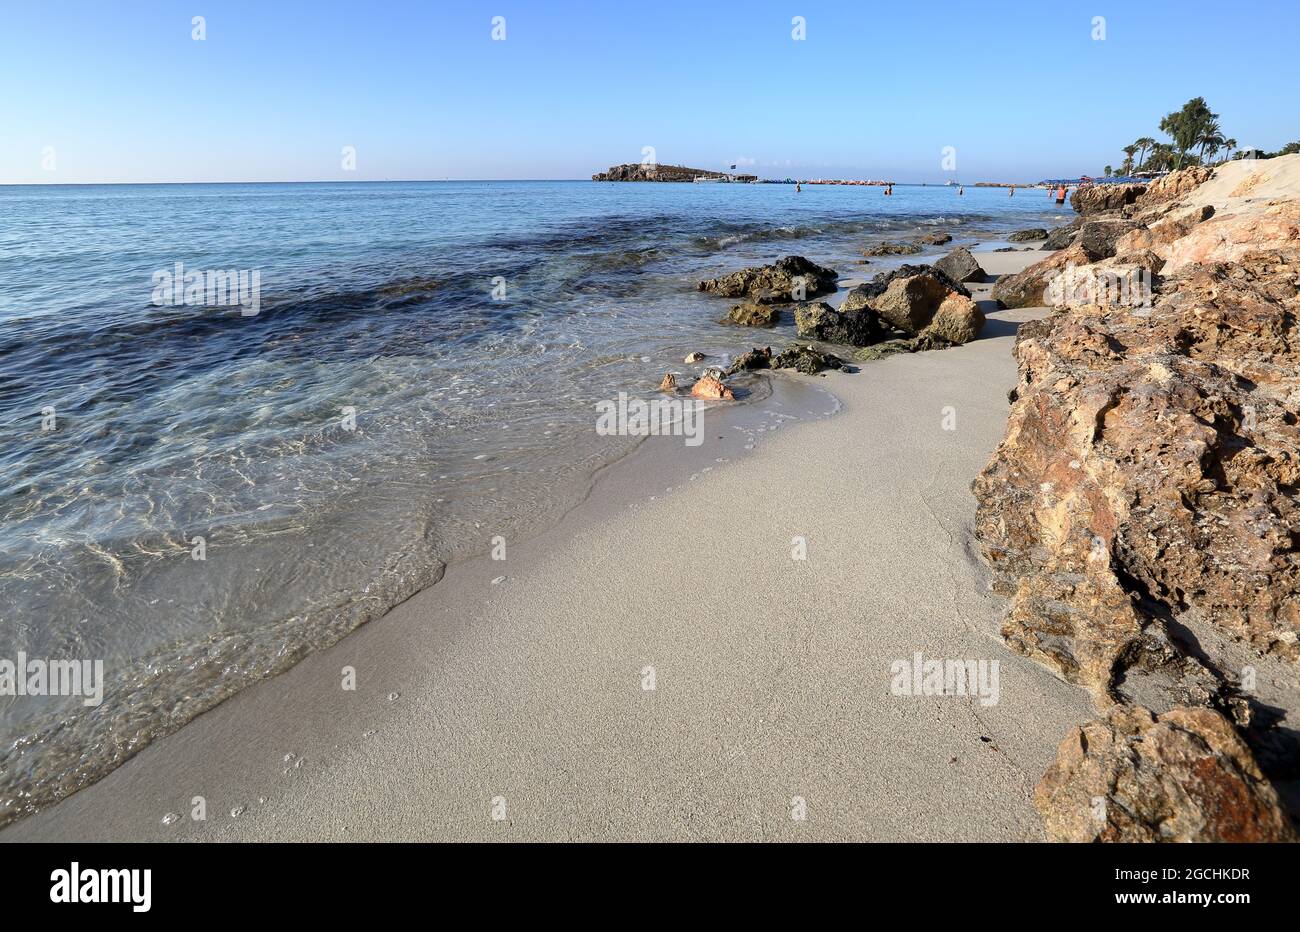 Beautiful pure Meditteranean sea bay and Nissi beach, snad and rocks, holiday vacation destination, Cyprus. Stock Photo